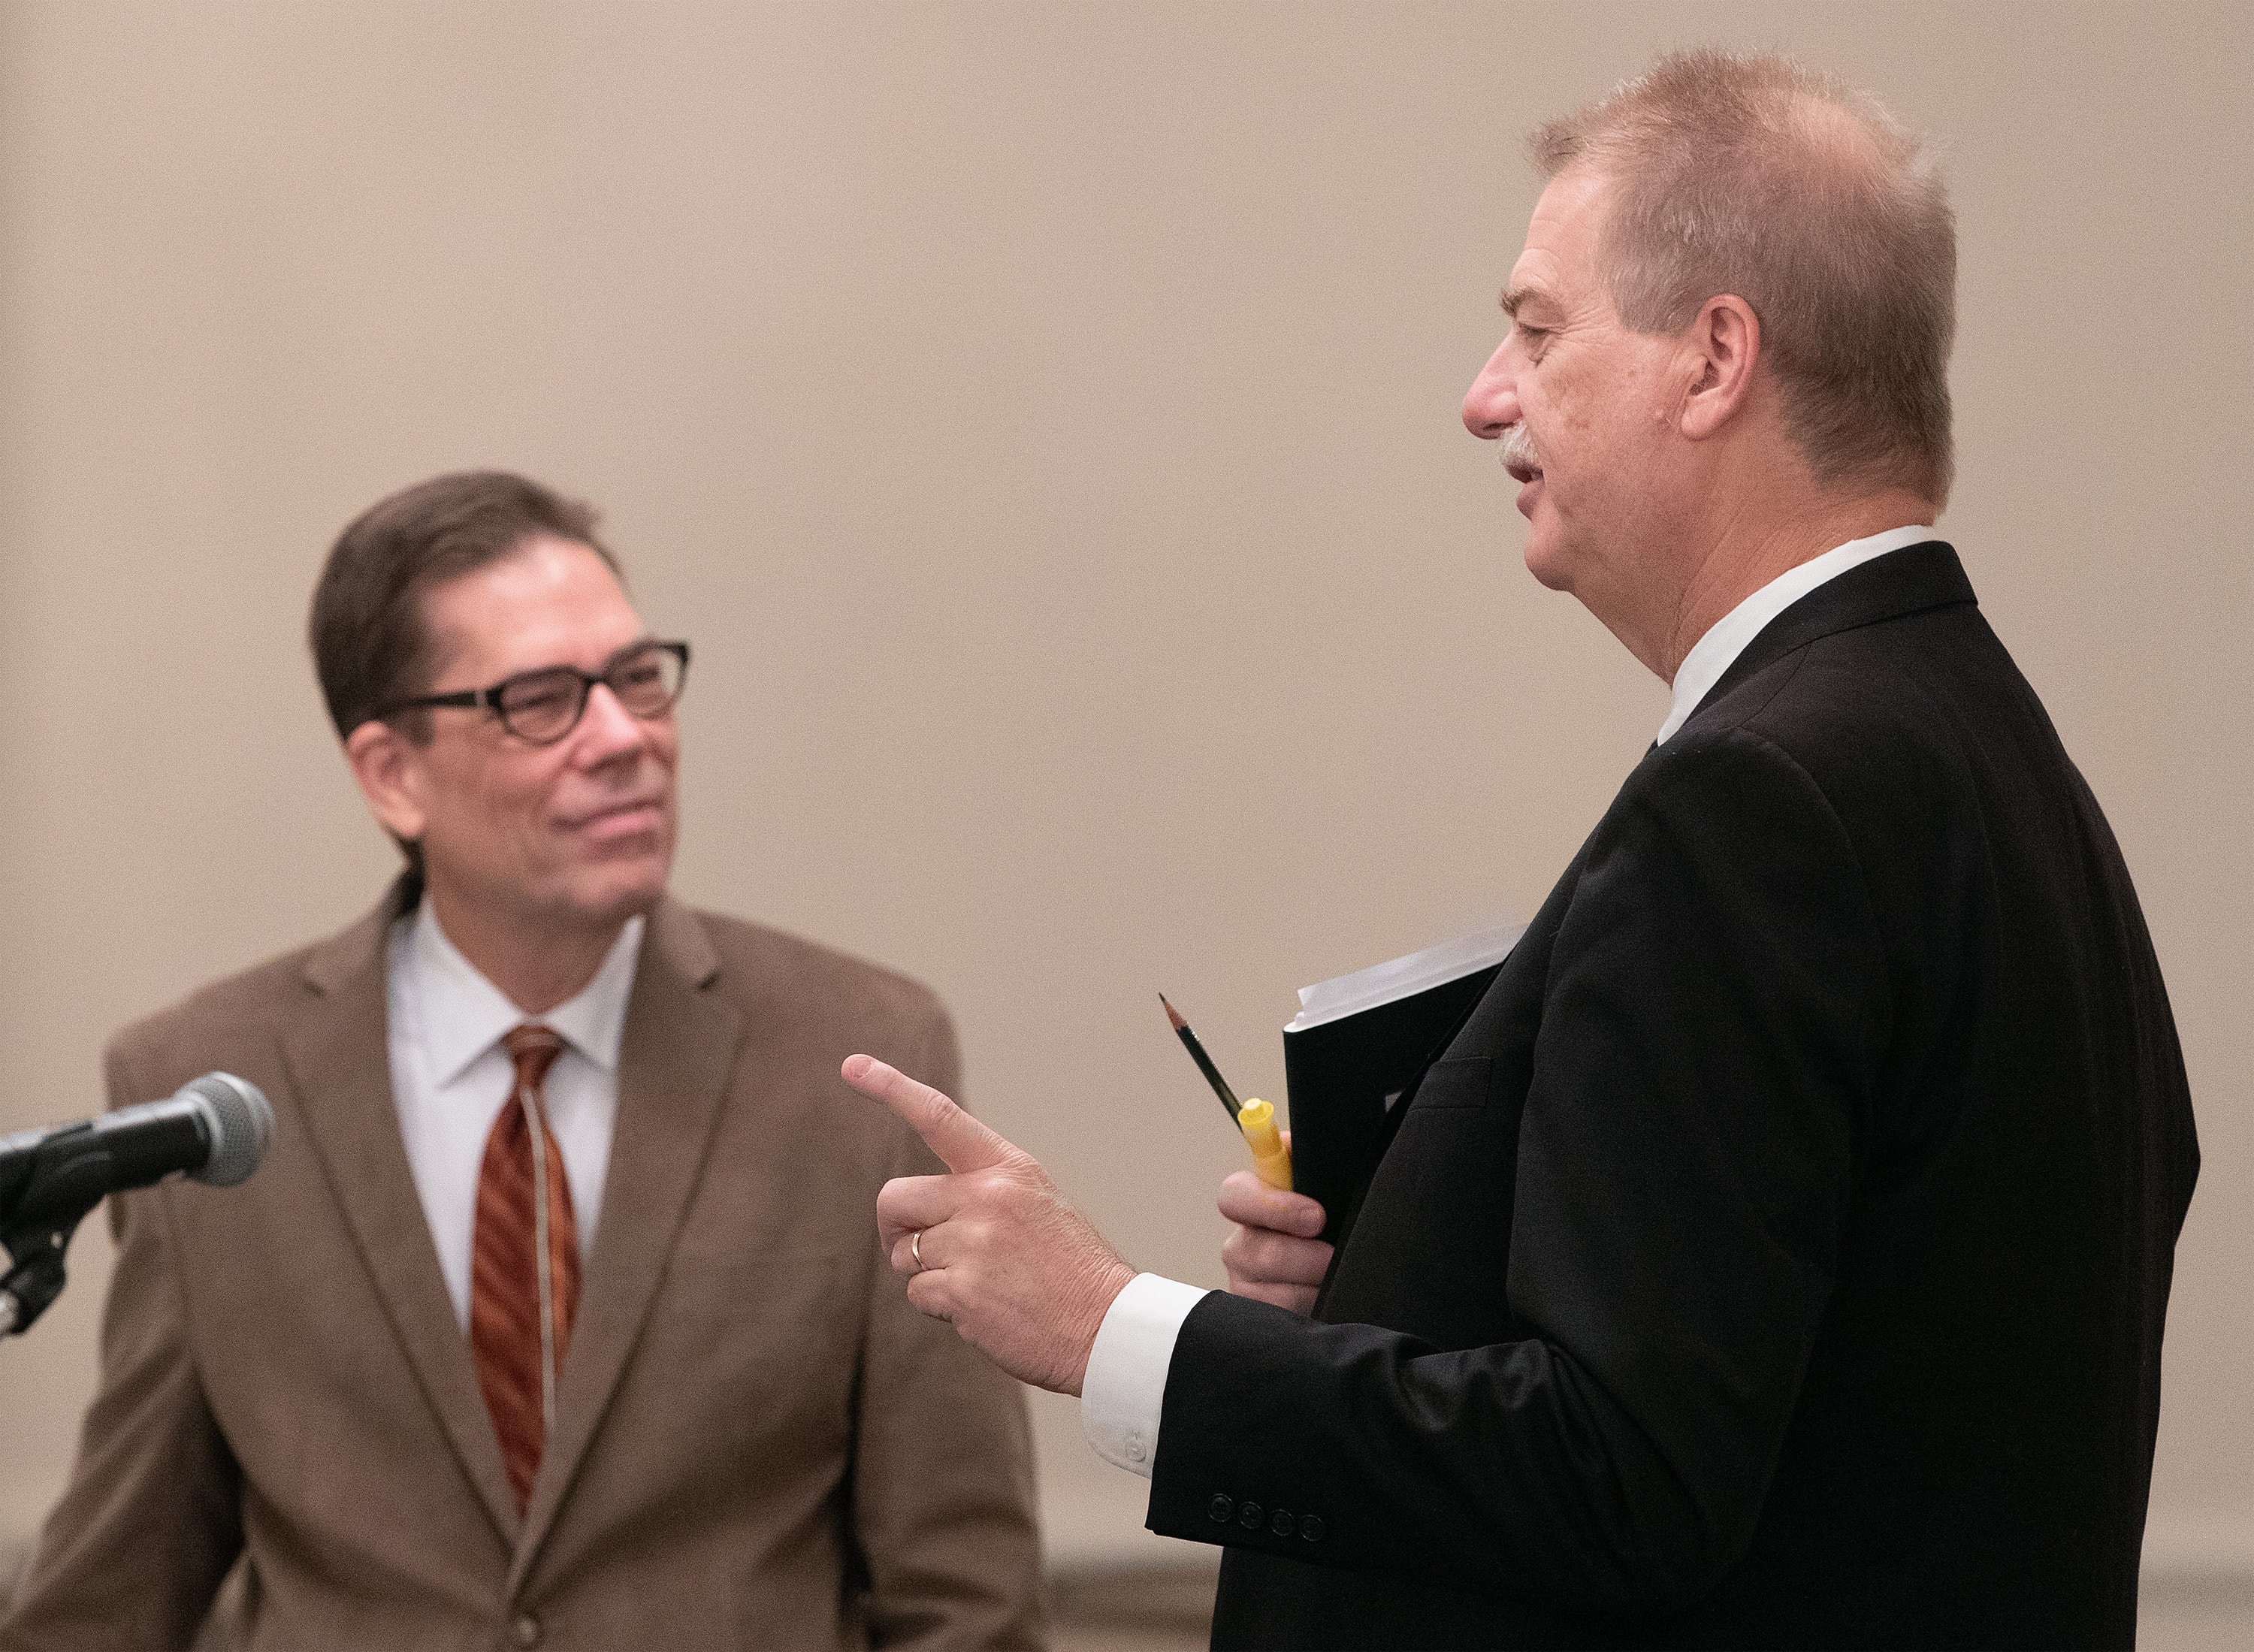 The Rev. Tom Lambrecht (left) and Bishop Kenneth H. Carter visit prior to the start of oral hearings before the United Methodist Judicial Council meeting in Evanston, Ill. Lambrecht is vice president and general manager of Good News and a member of the Wesleyan Covenant Association leadership. Carter is president of the denomination's Council of Bishops. Photo by Mike DuBose, UM News.